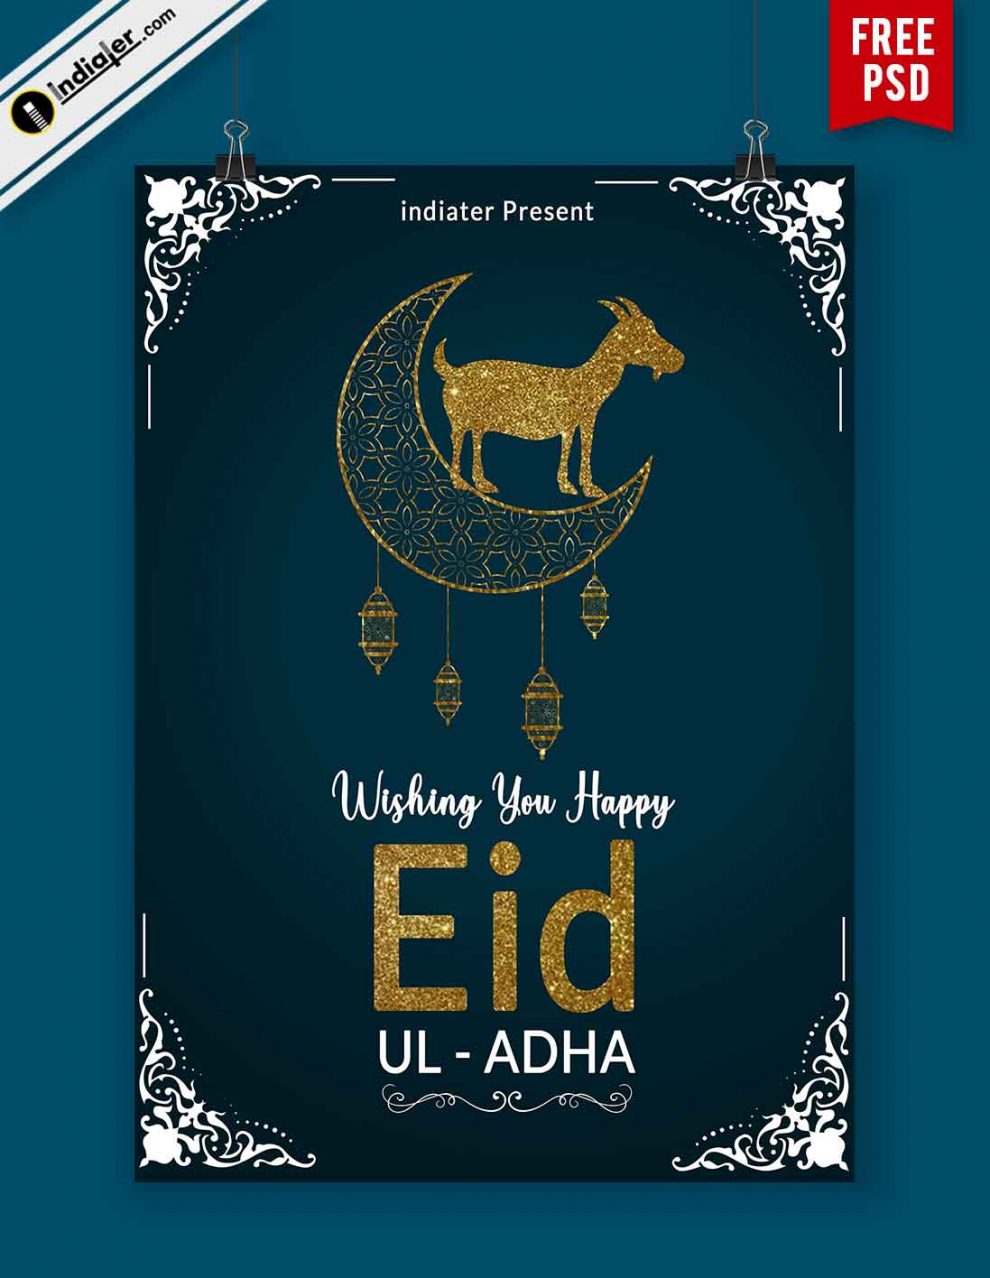 Free Eid Ul Adha Wishes Flyer PSD Template - Indiater